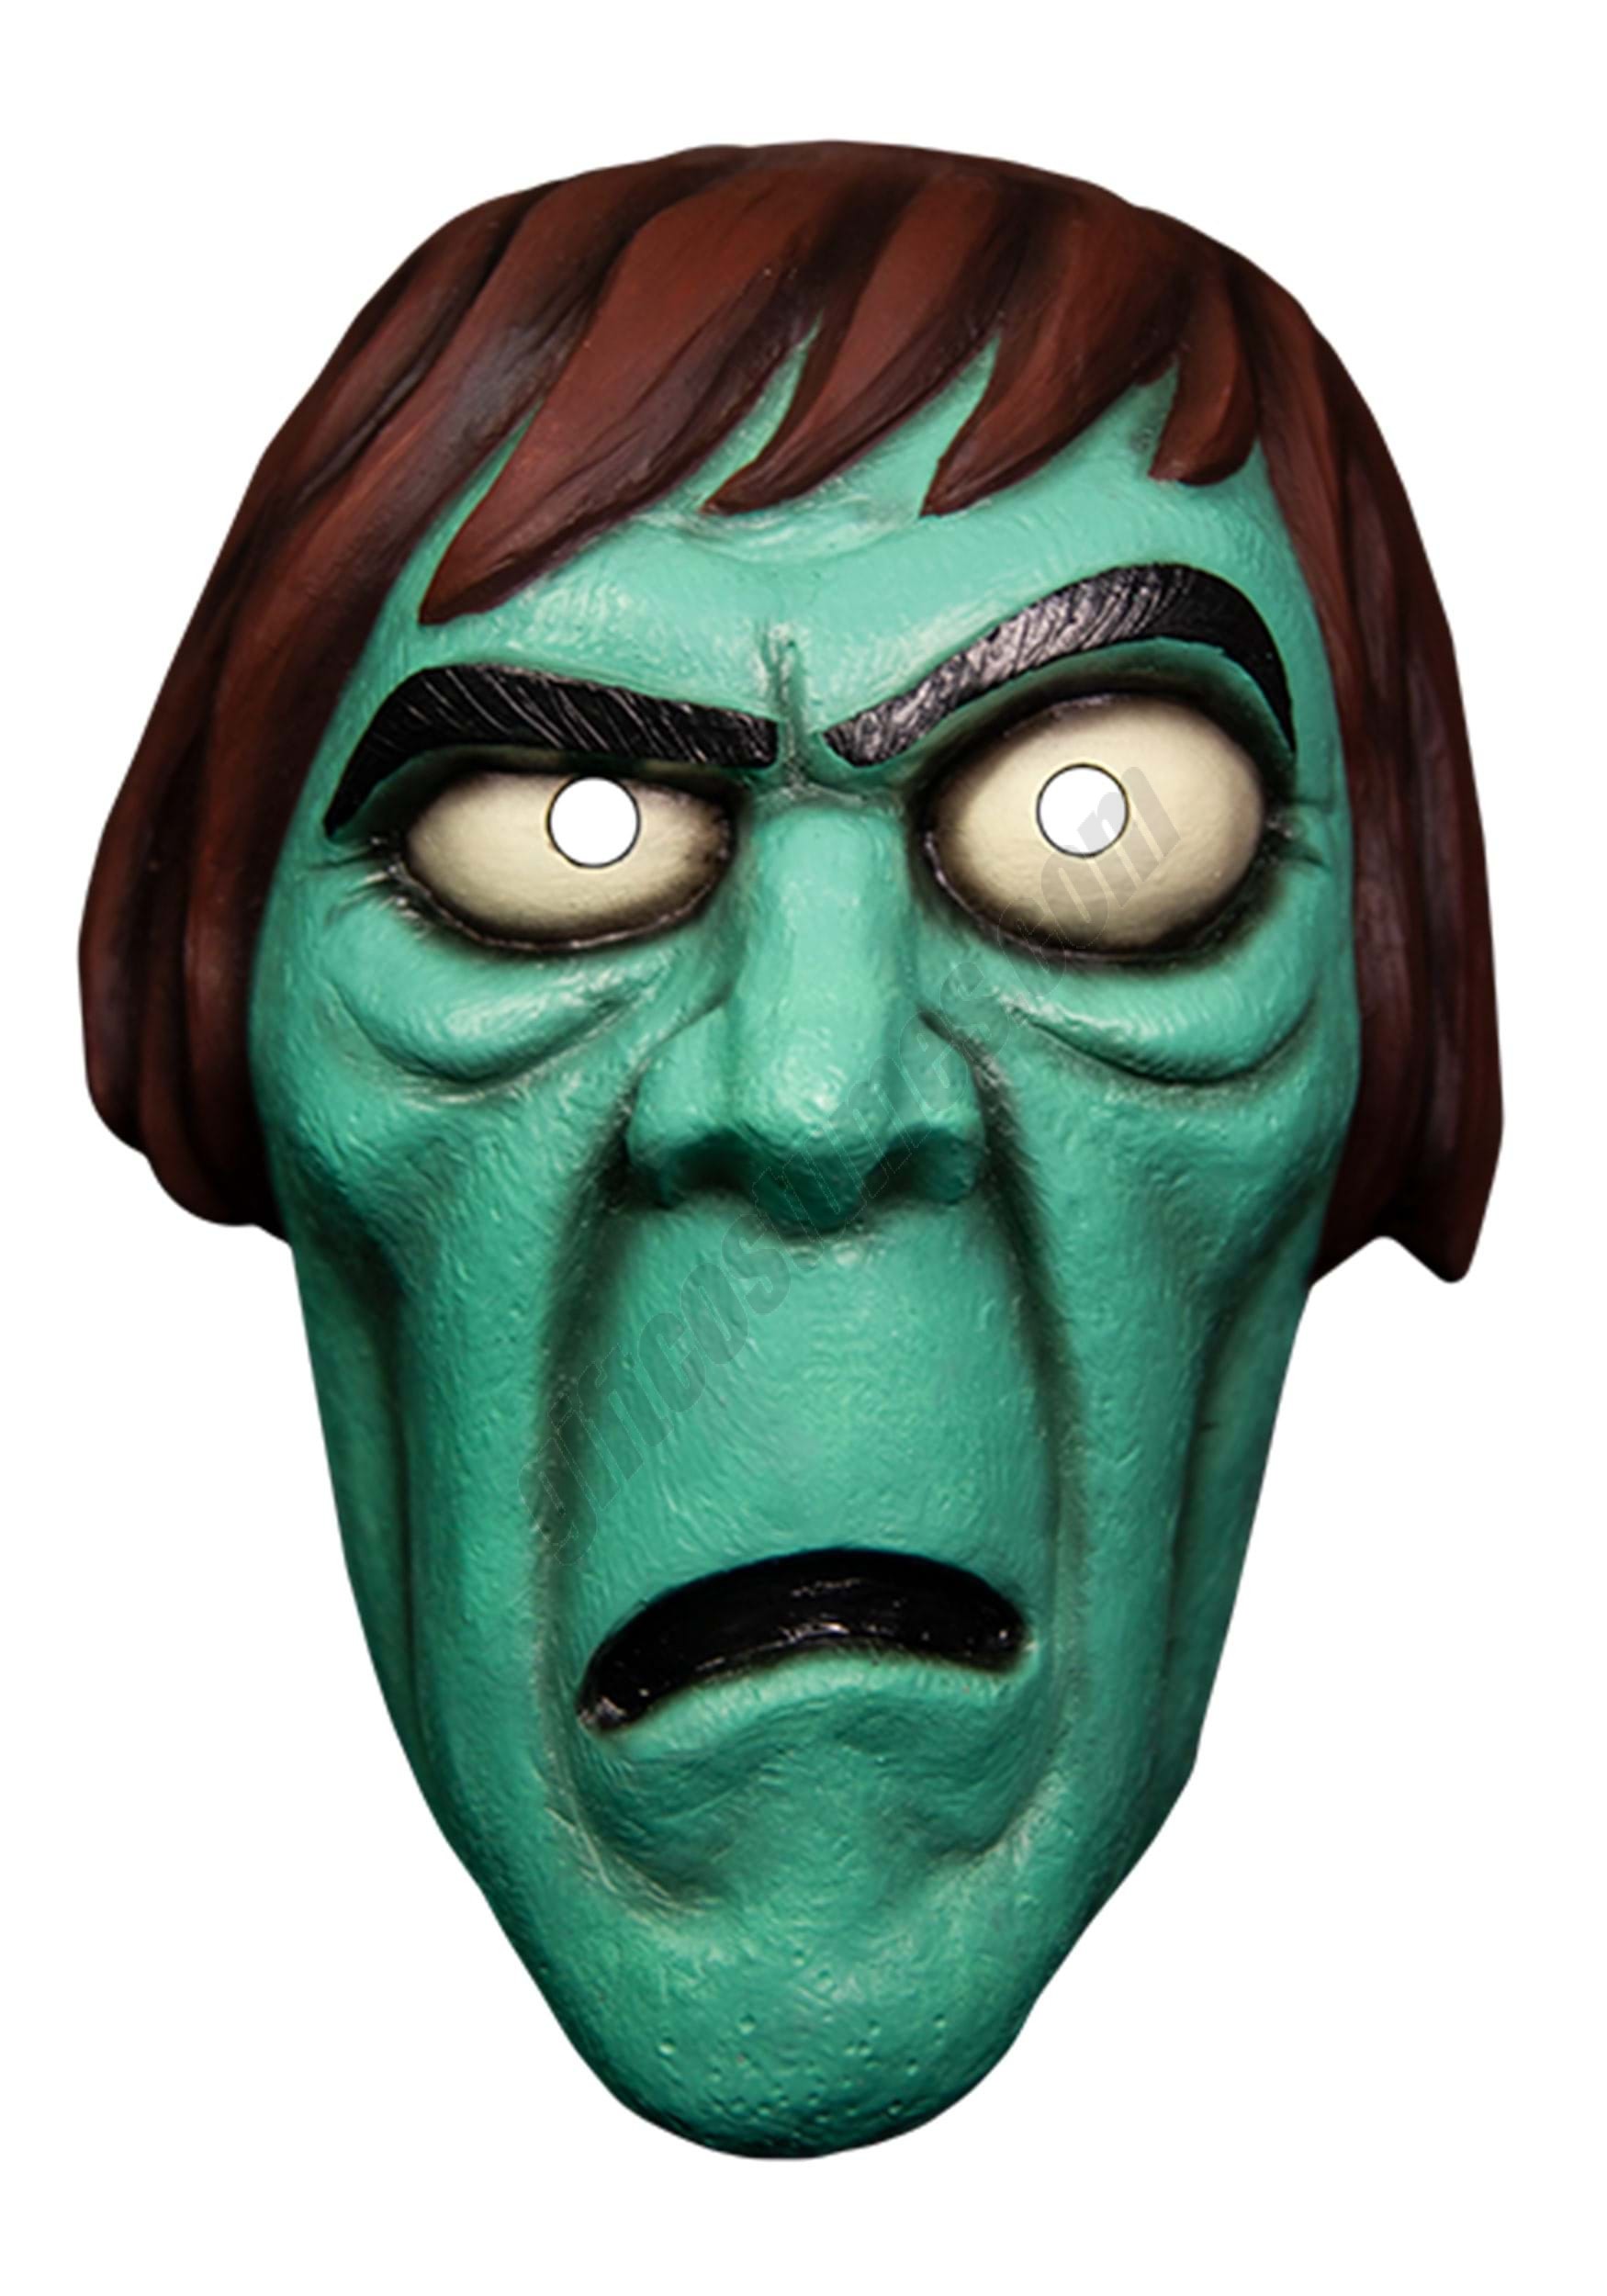 Scooby Doo Vacuform Mask of the Creeper  Promotions - Scooby Doo Vacuform Mask of the Creeper  Promotions